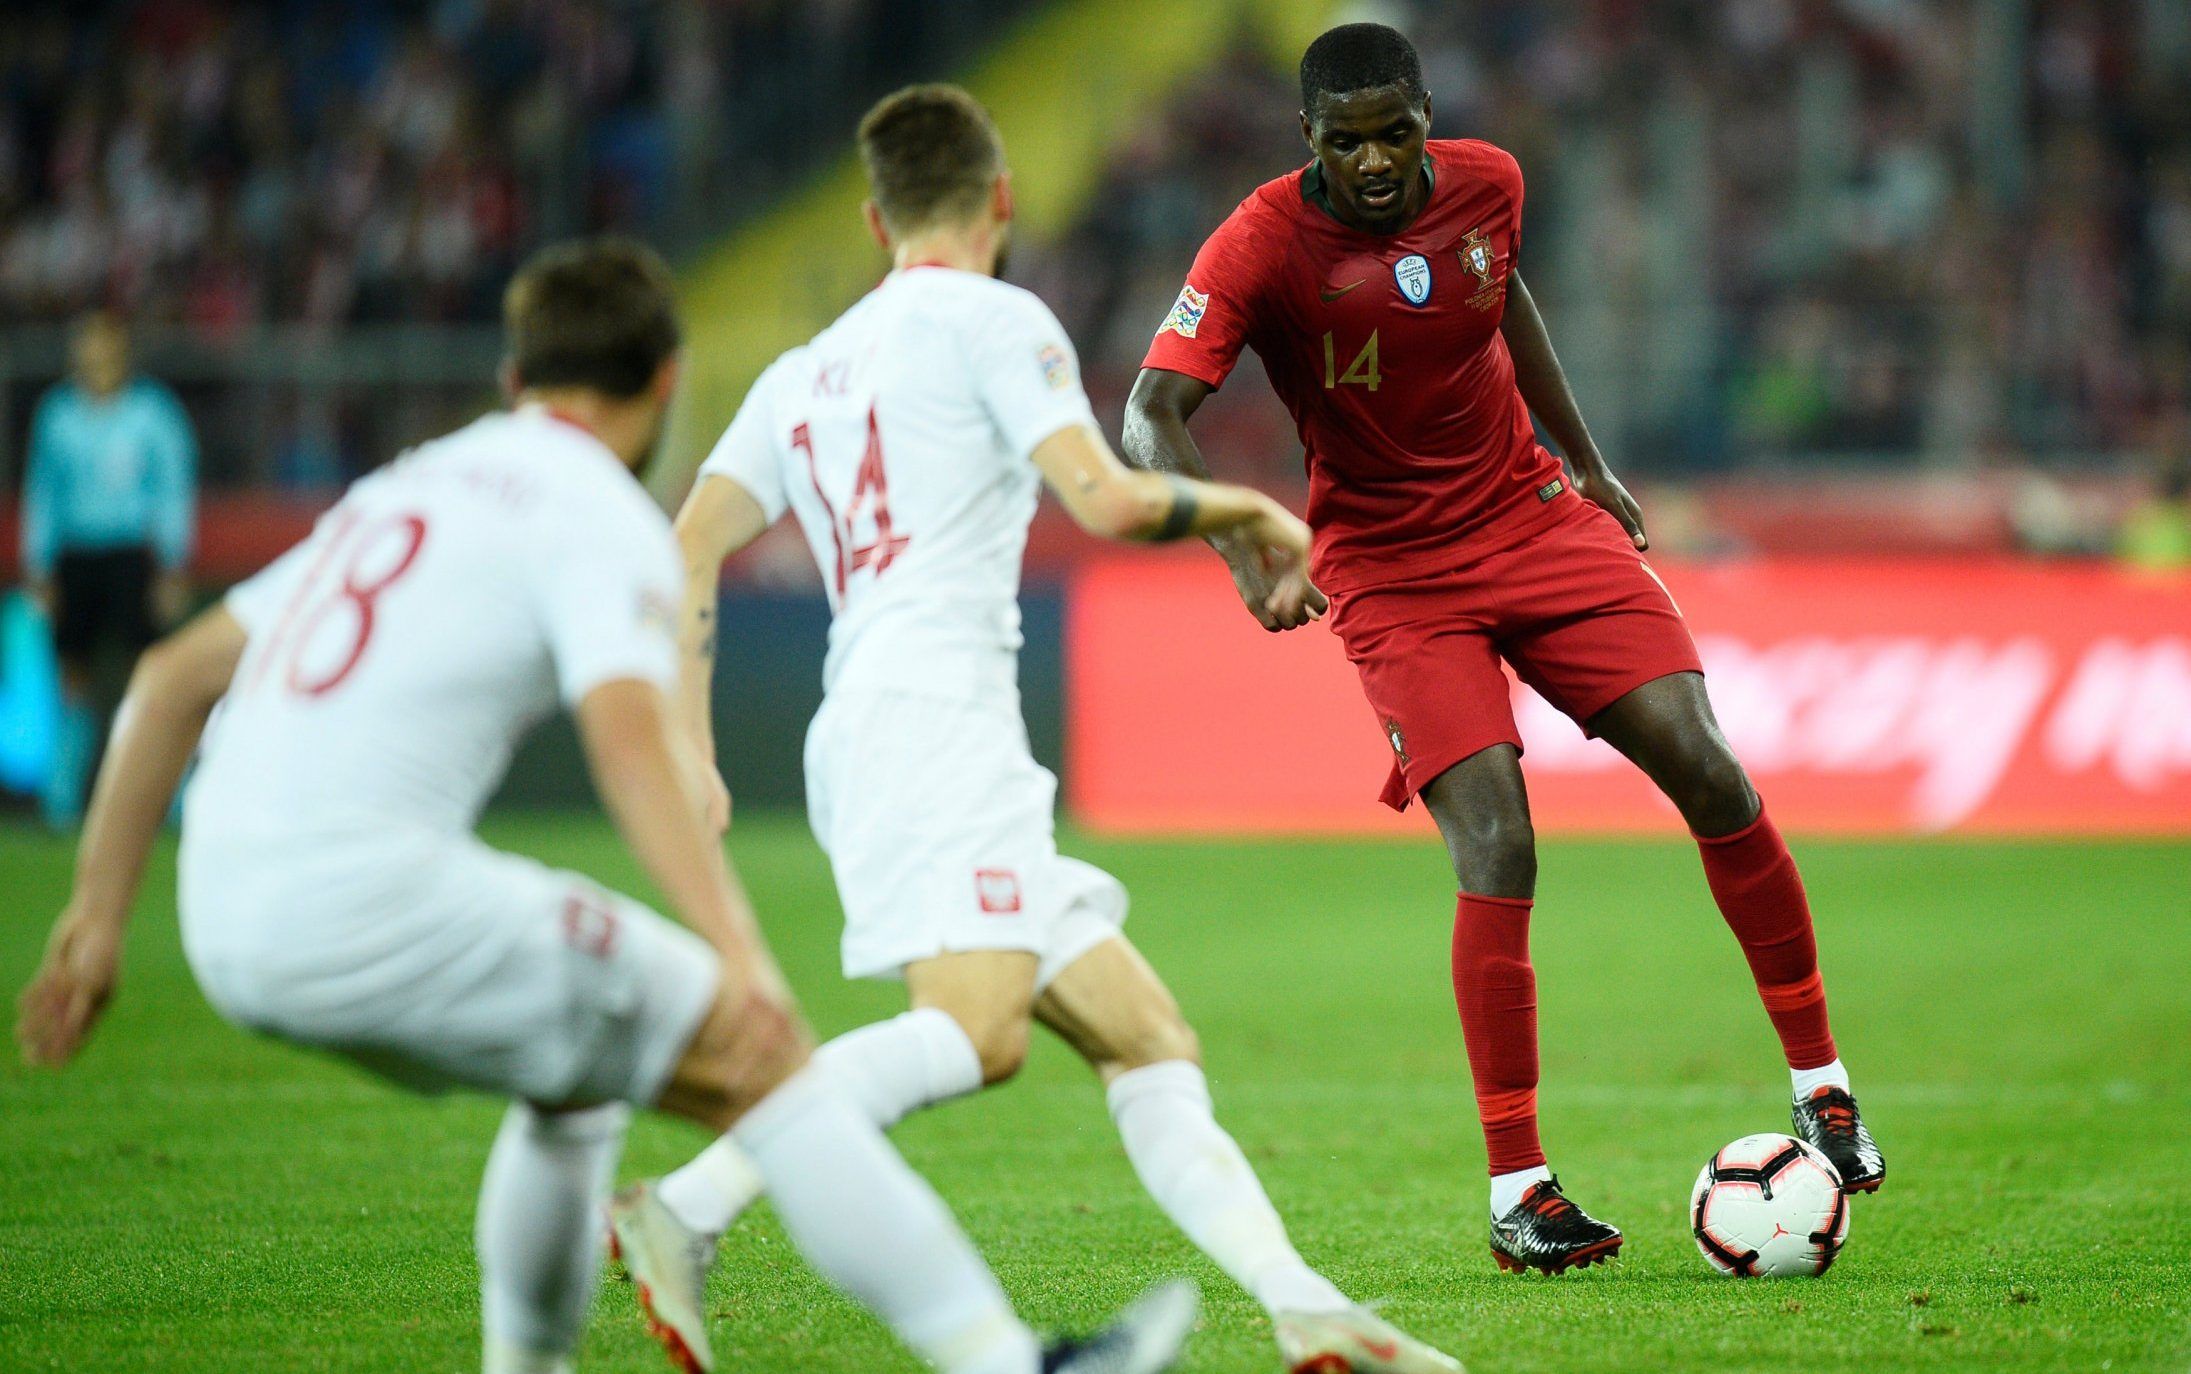 portugal and real betis midfielder in action vs poland uefa nations league west brom sam allardyce transfer rumours